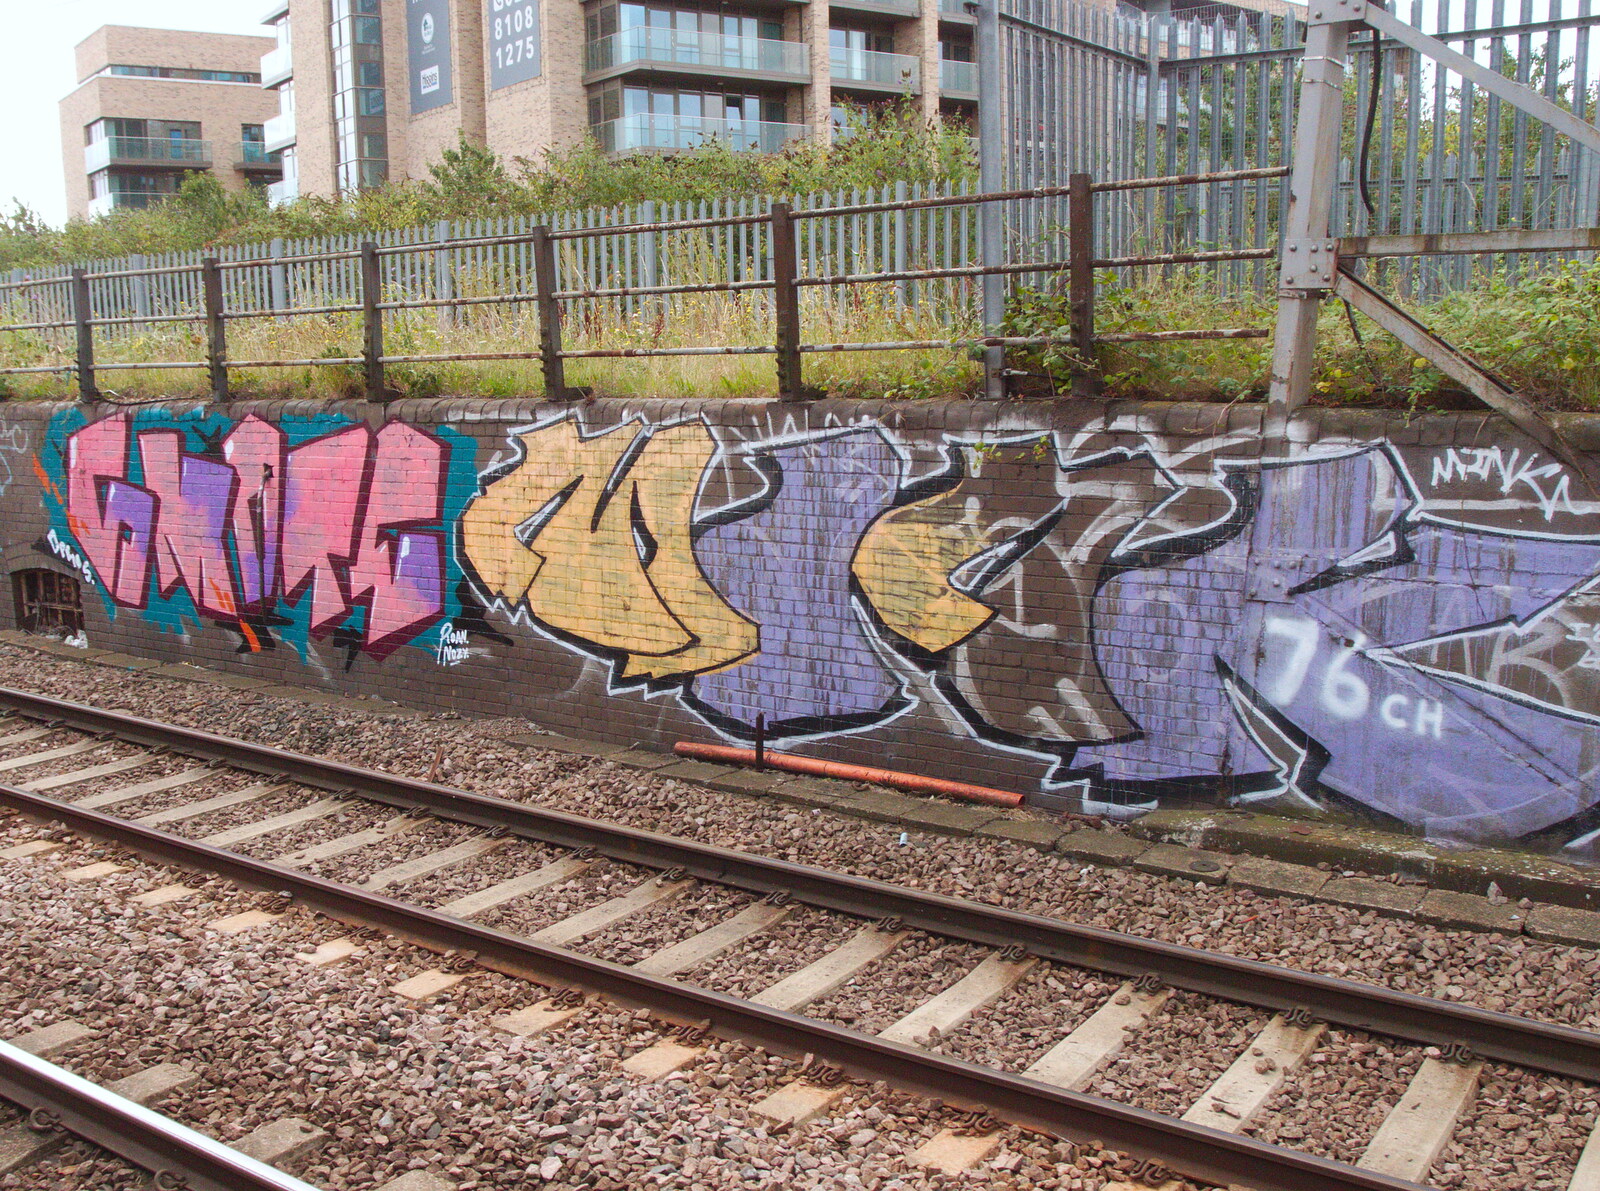 More pastel graffiti from The BSCC at Redgrave and Railway Graffiti, Suffolk and London - 7th August 2019